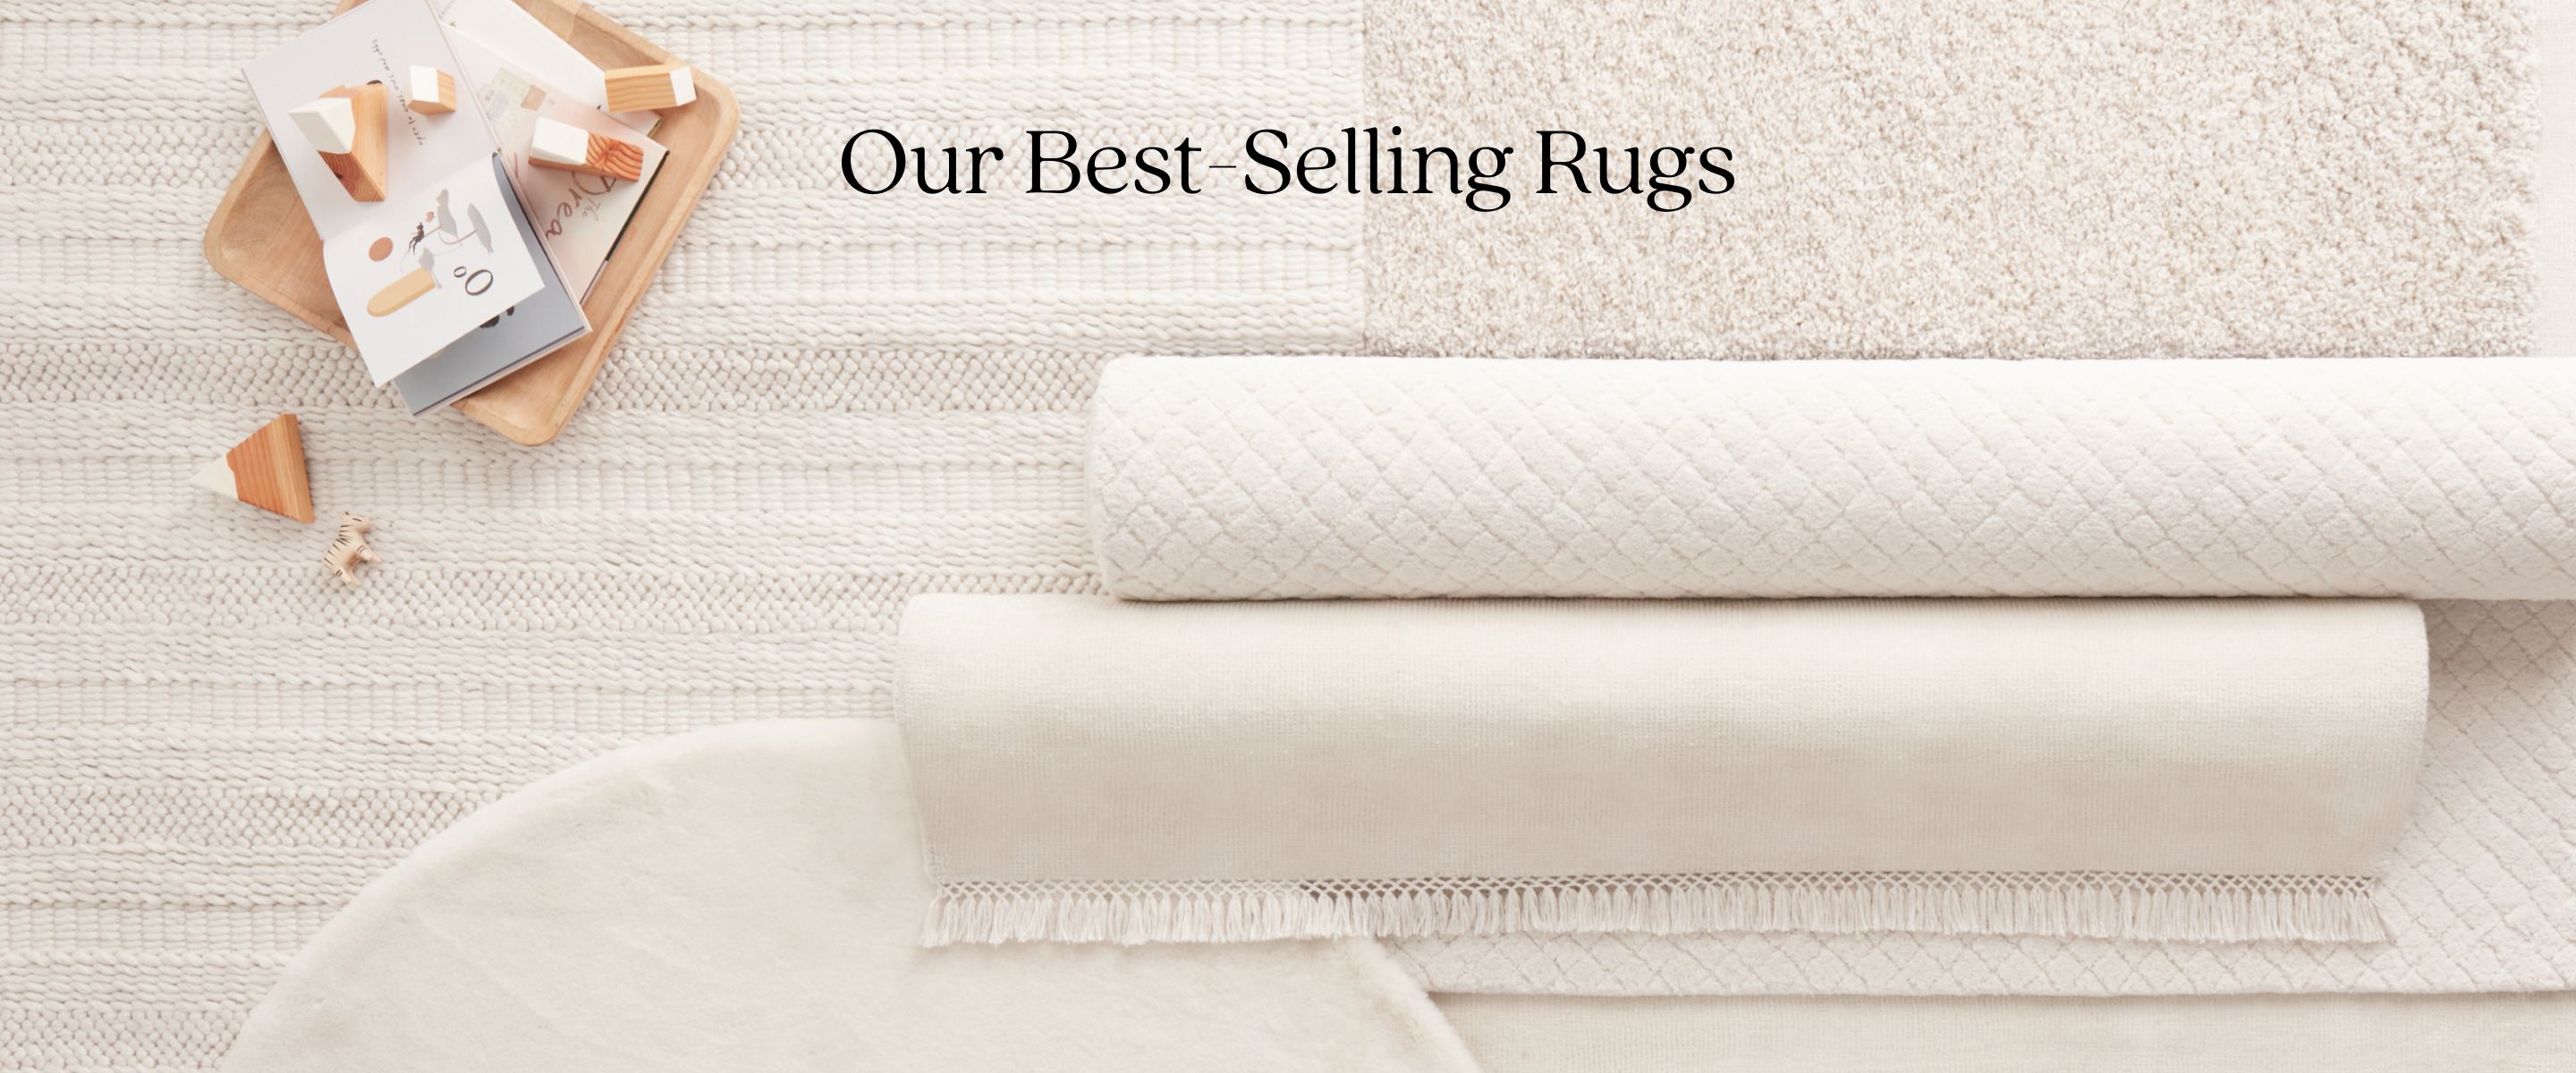 Our Best-Selling Rugs